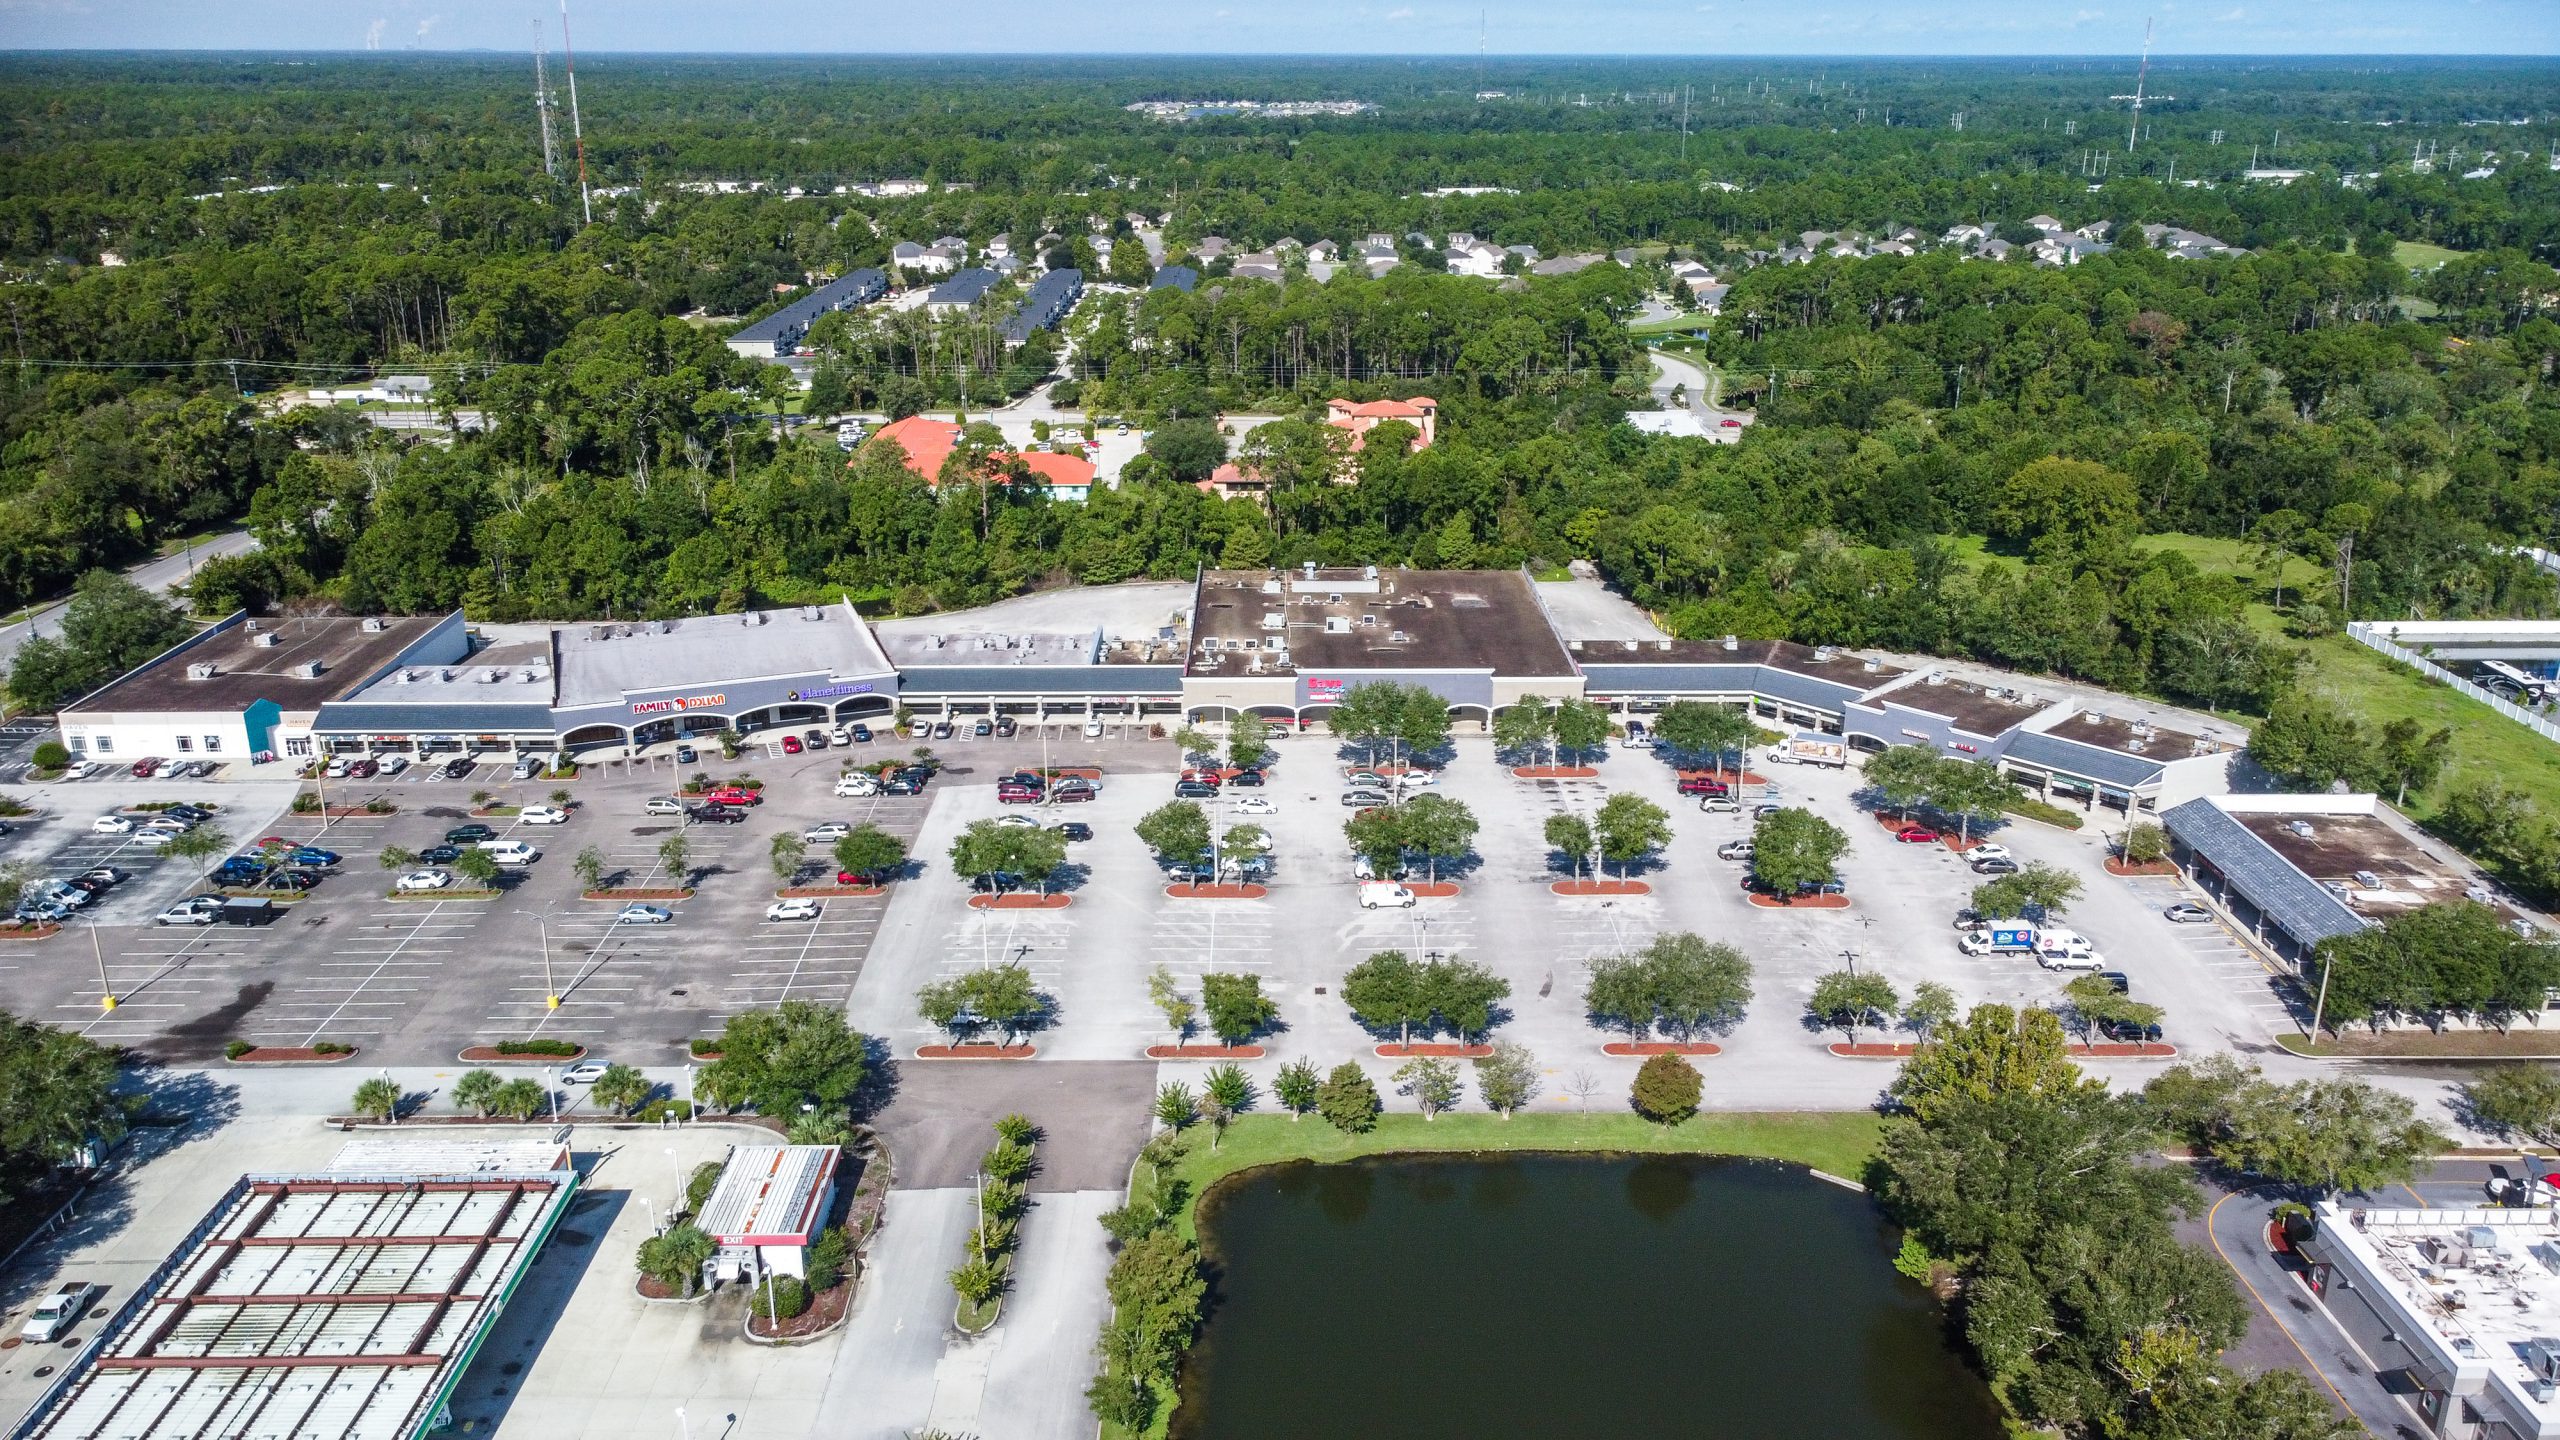 An aerial view of a parking lot and retail center.